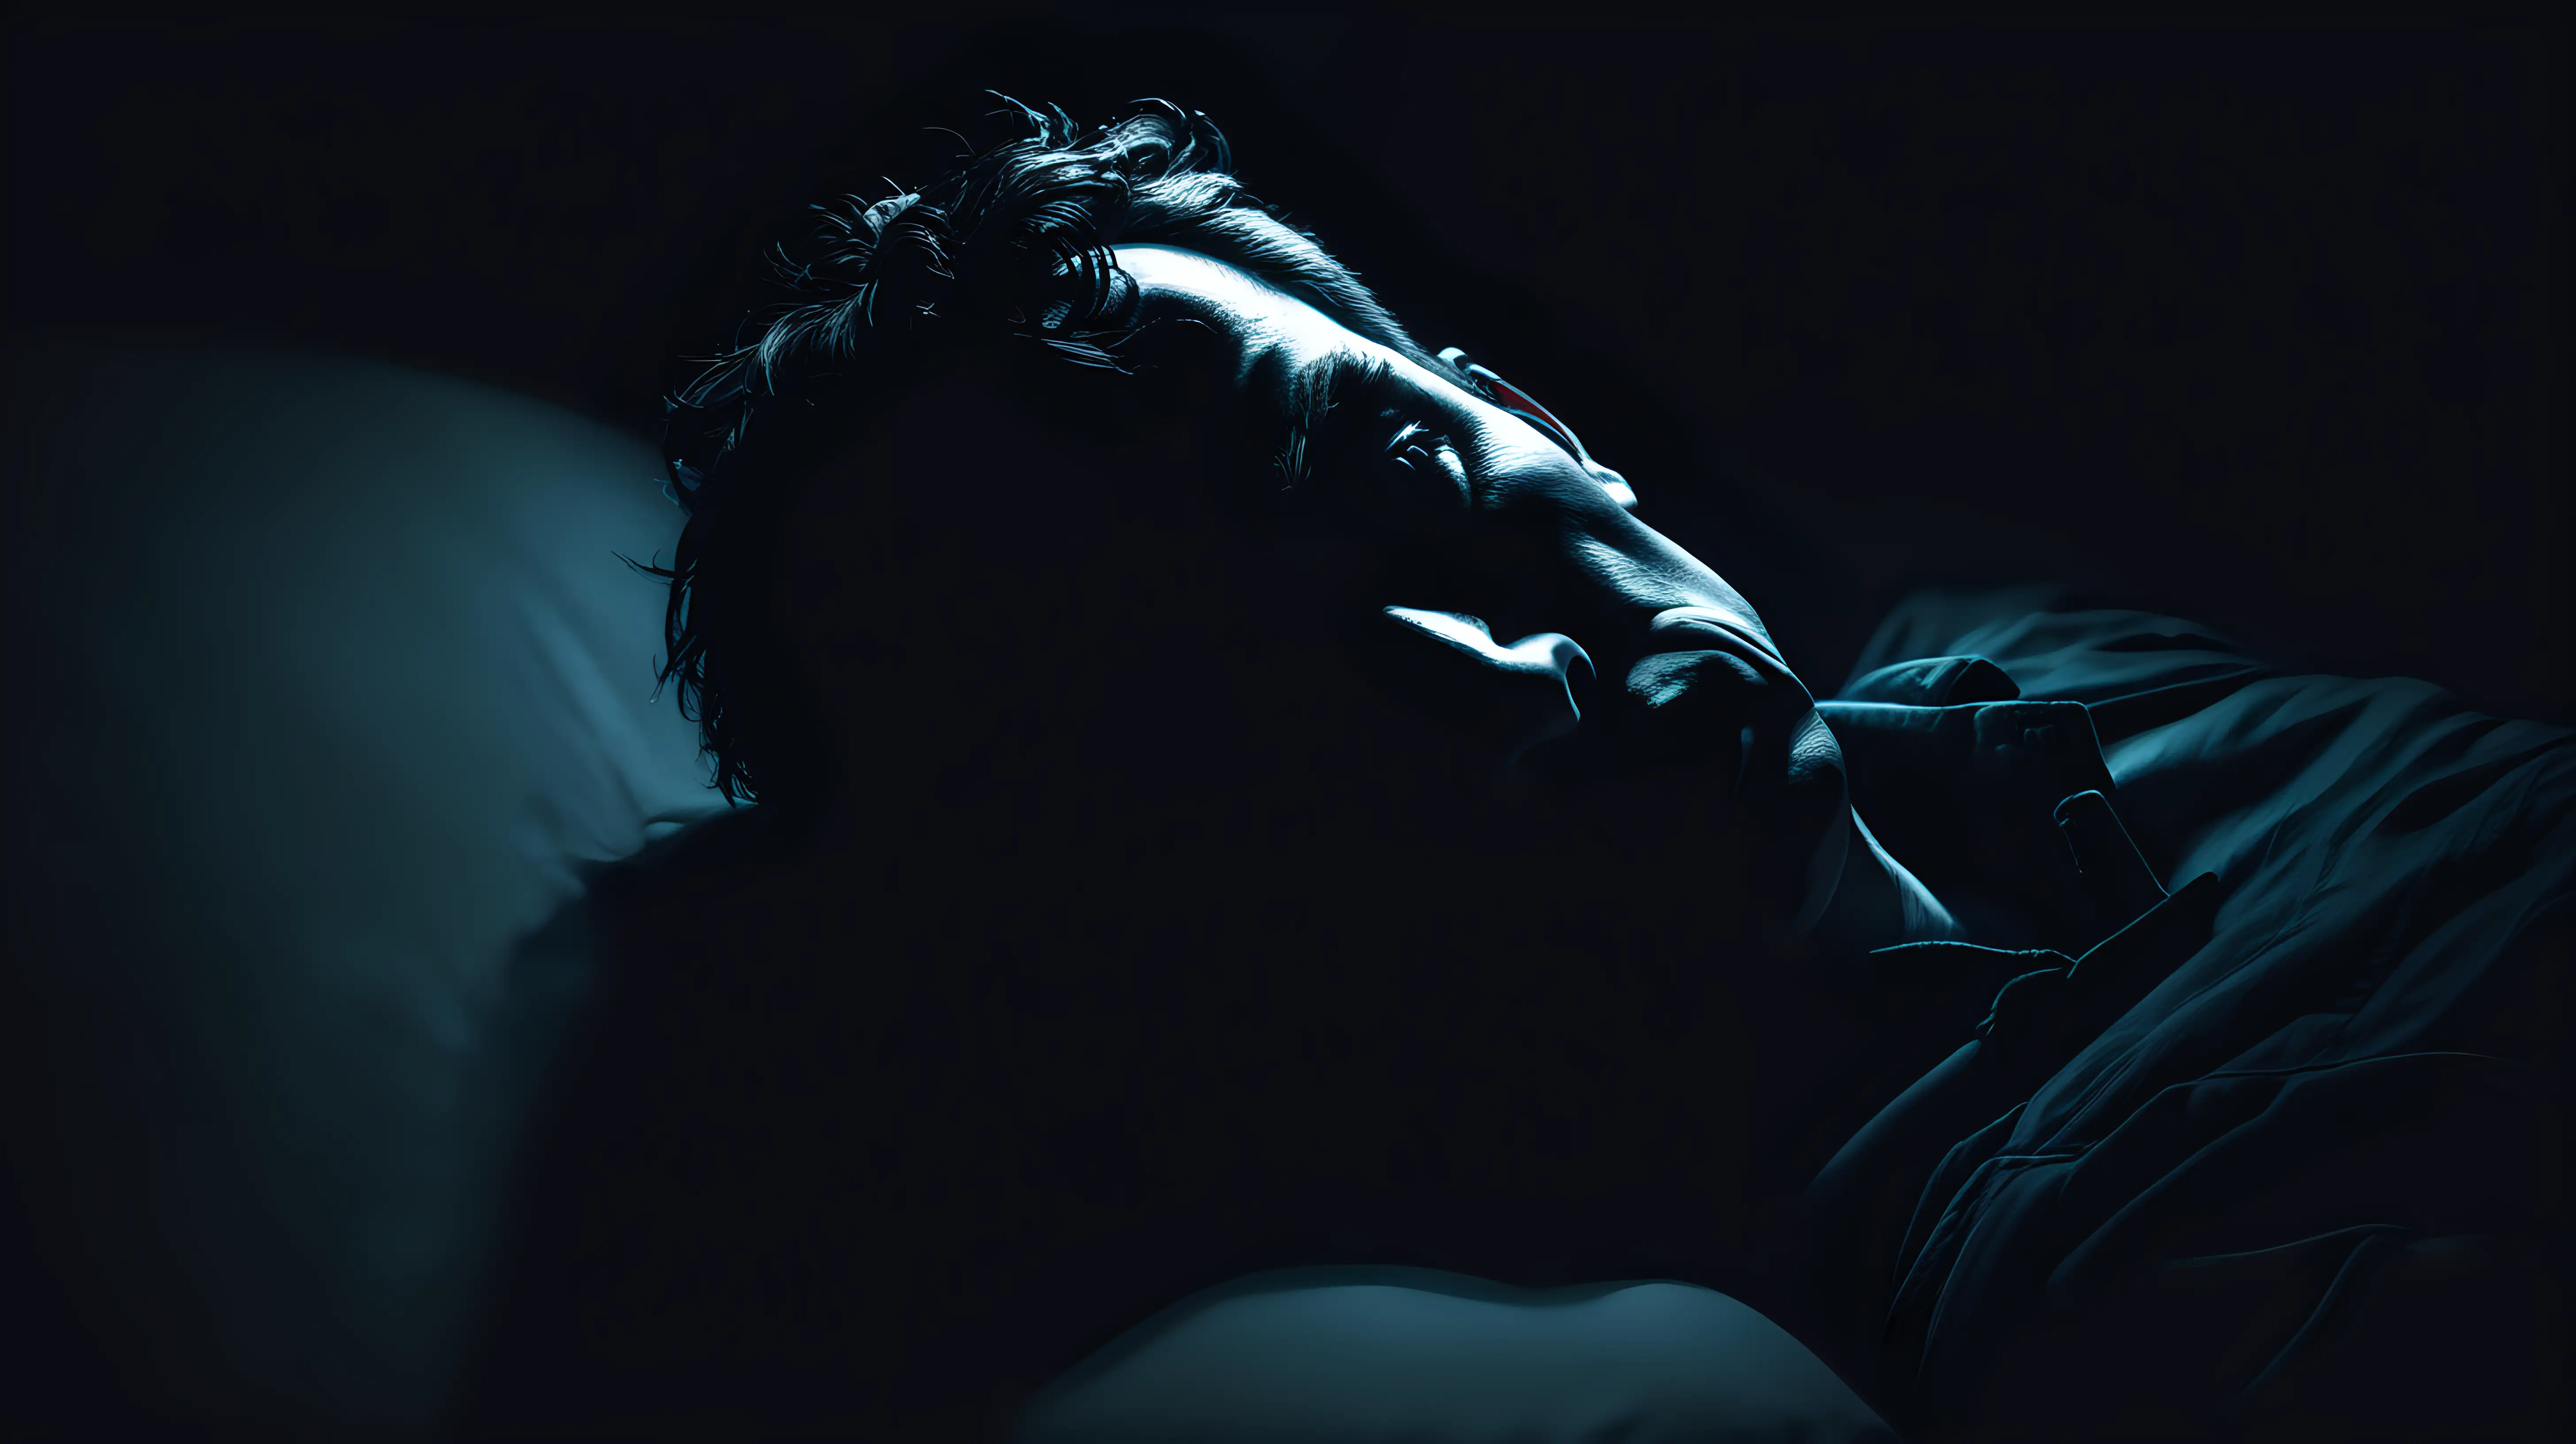 Serenity in Shadows Captivating Image of a Reclining Figure in Complete Darkness